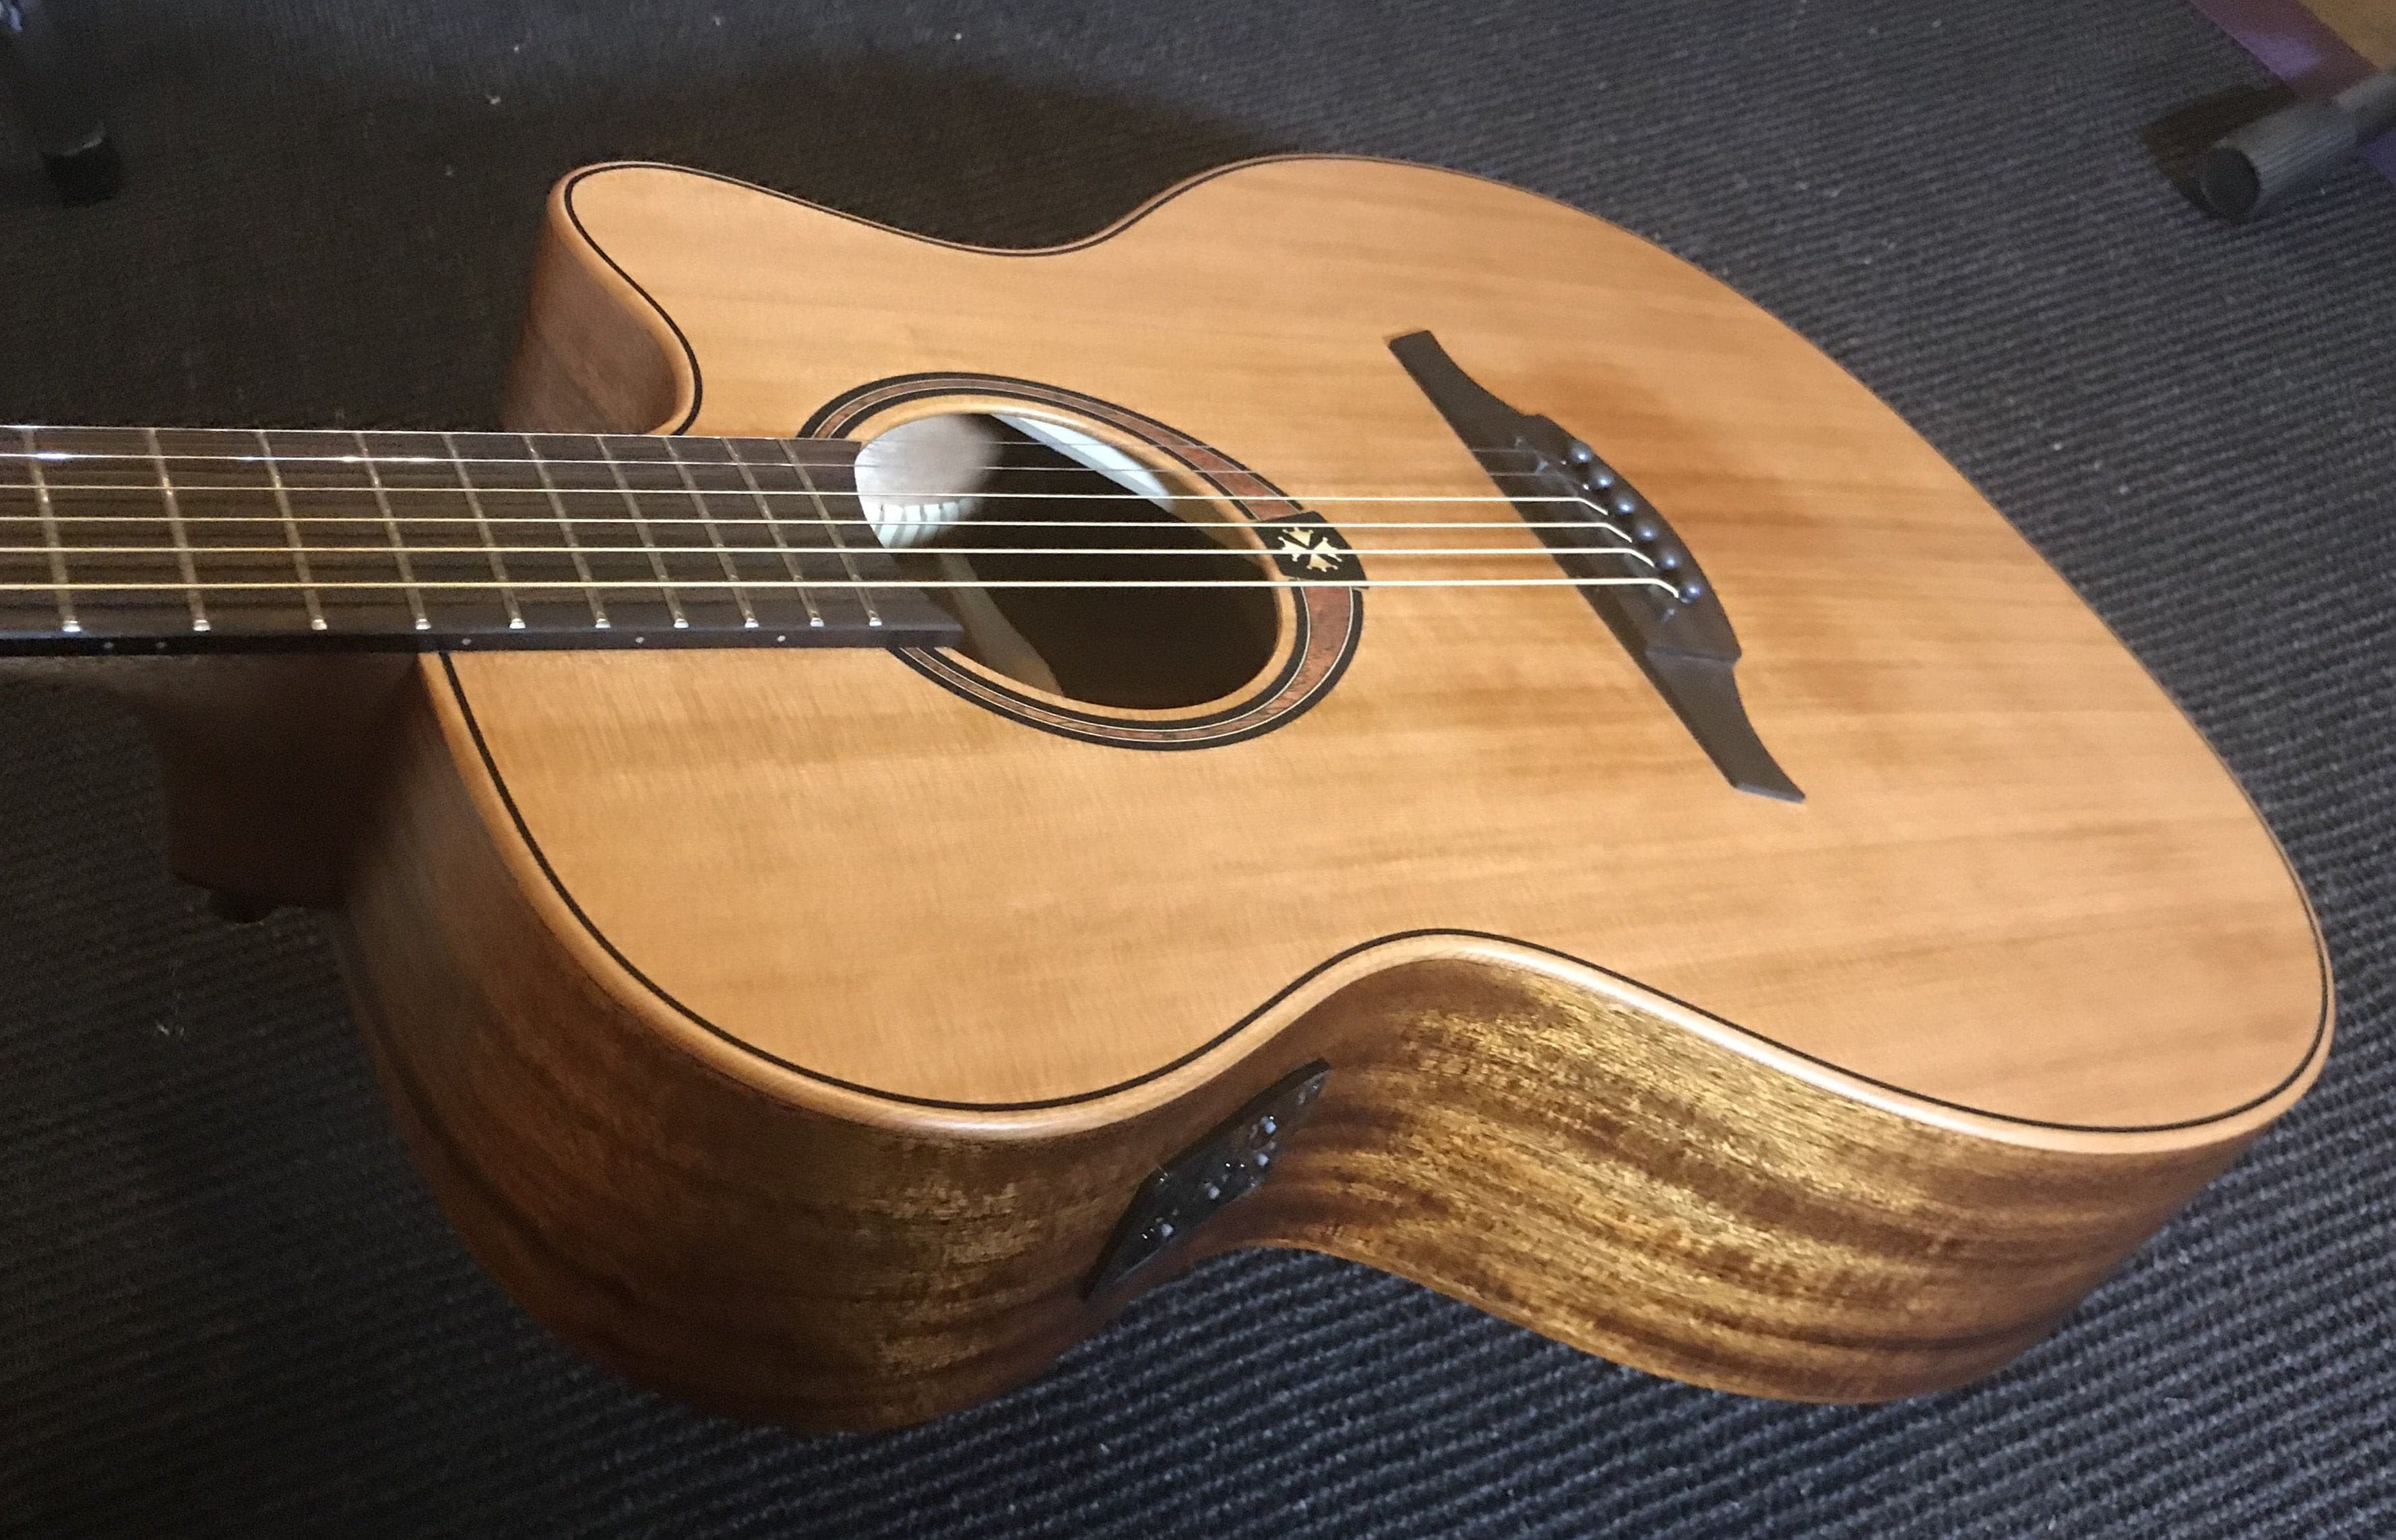 LAG TRAMONTANE 170 T170ACE AUDITORIUM CUTAWAY ELECTRO, Electro Acoustic Guitar for sale at Richards Guitars.